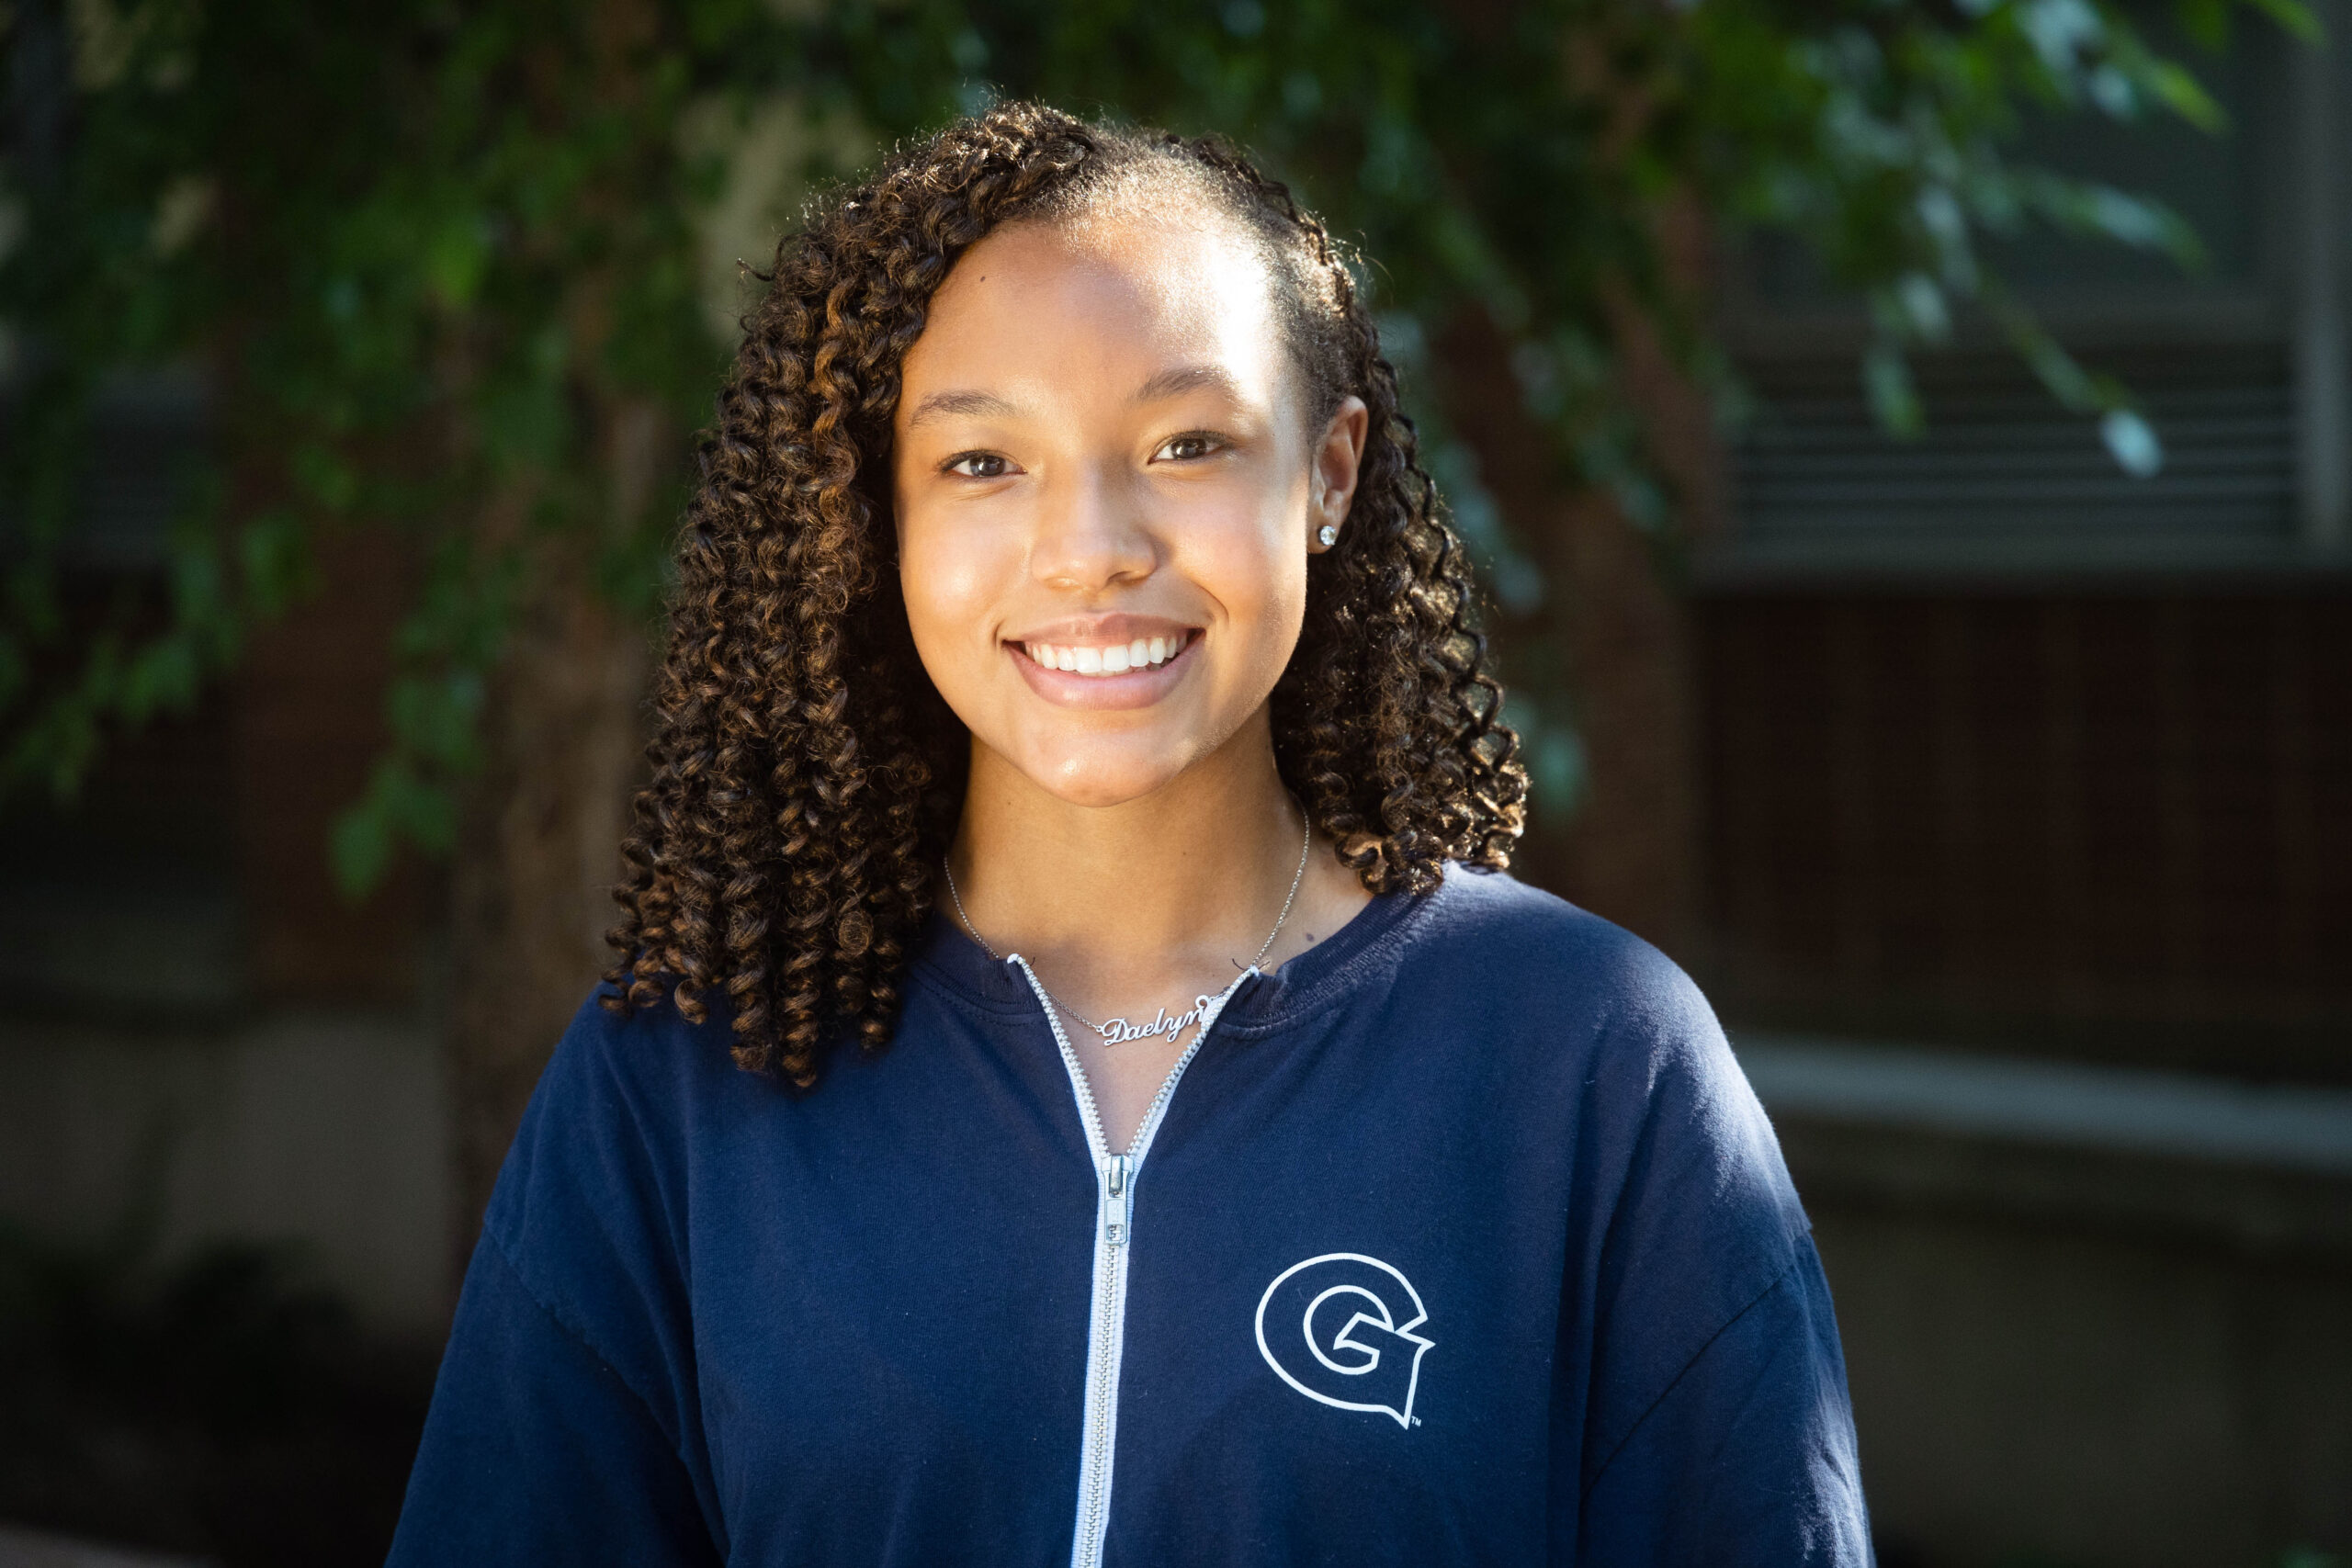 Headshot of Daelyn, wearing a GU athletics zip up smiling and standing in front of trees